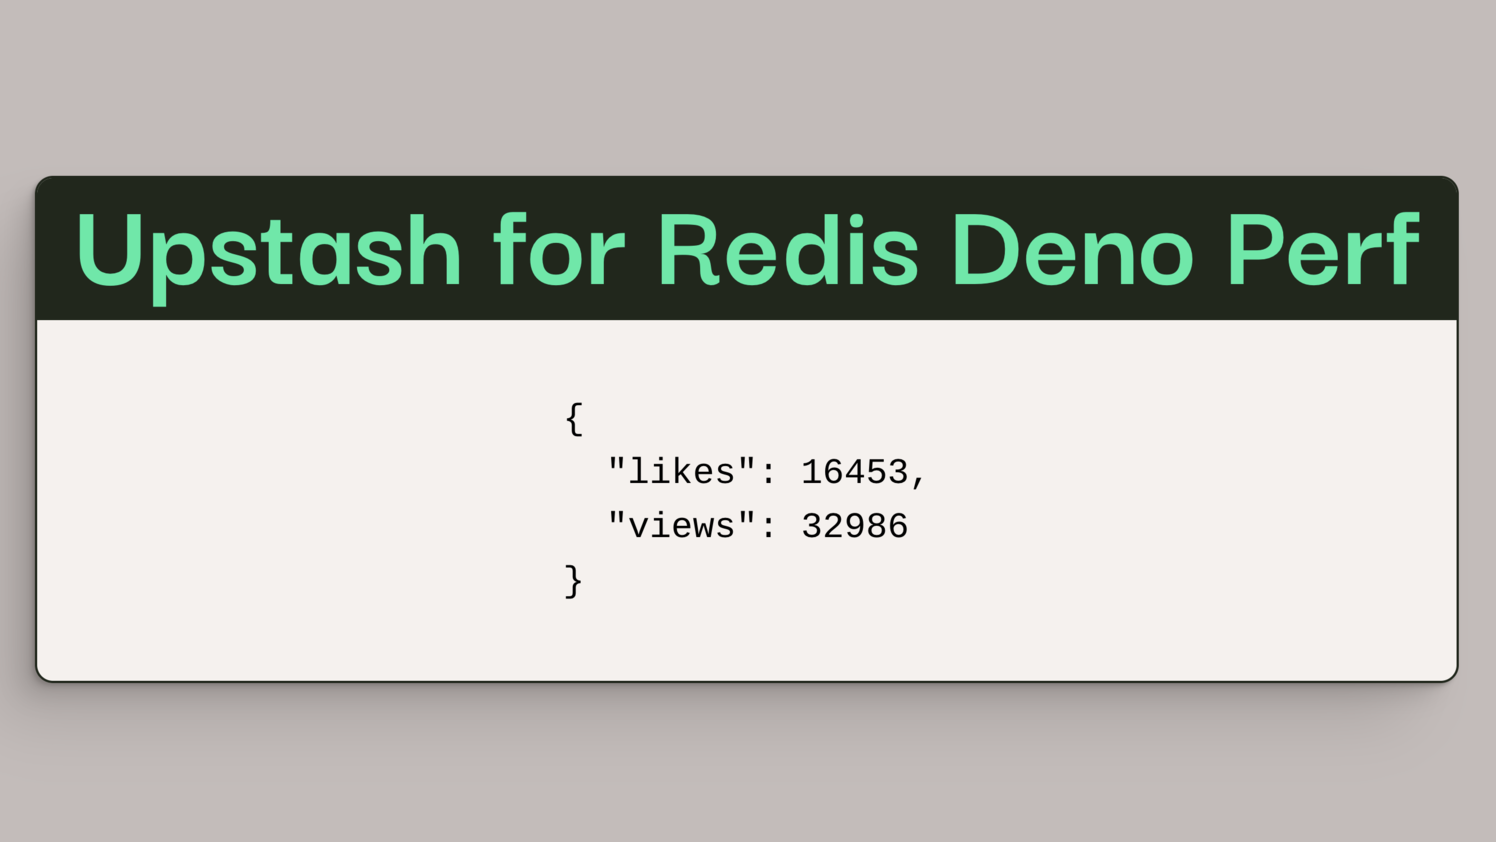 Redis and Performance API: Skeleton app show likes and views counts